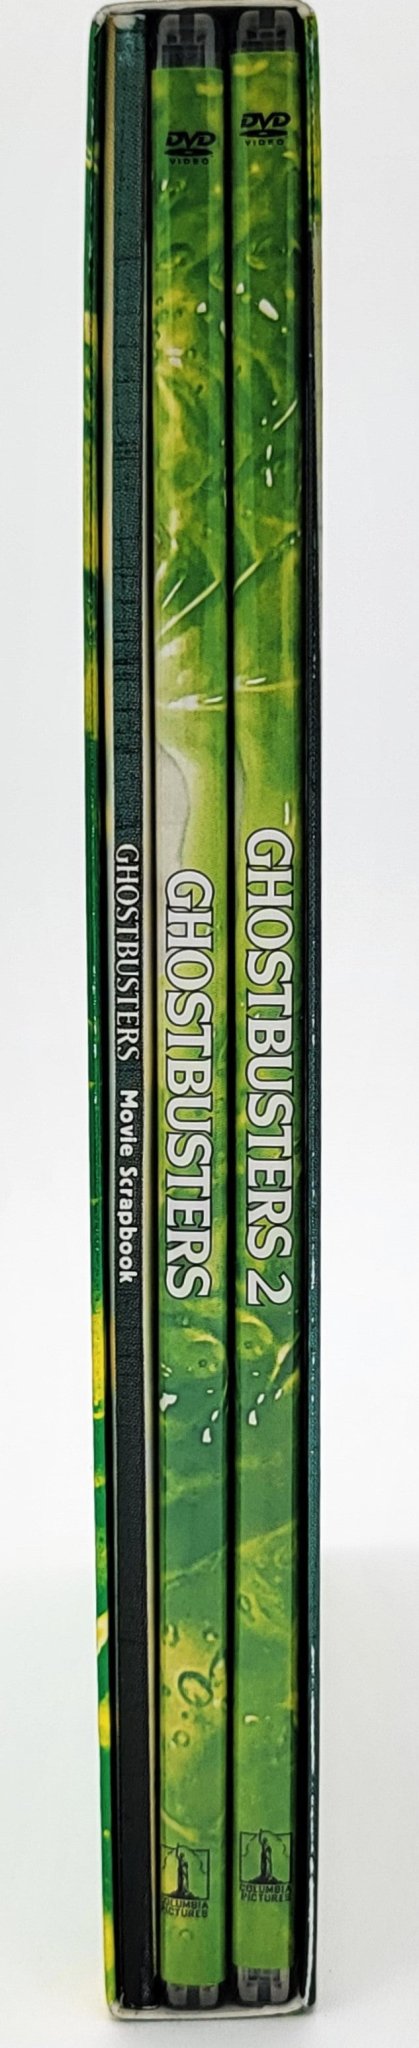 Sony Pictures Home Entertainment - Ghostbusters 1 & 2 | DVD | Double Feature Gift Set - With Ghostbuster Movie Scrapbook - DVD - Steady Bunny Shop